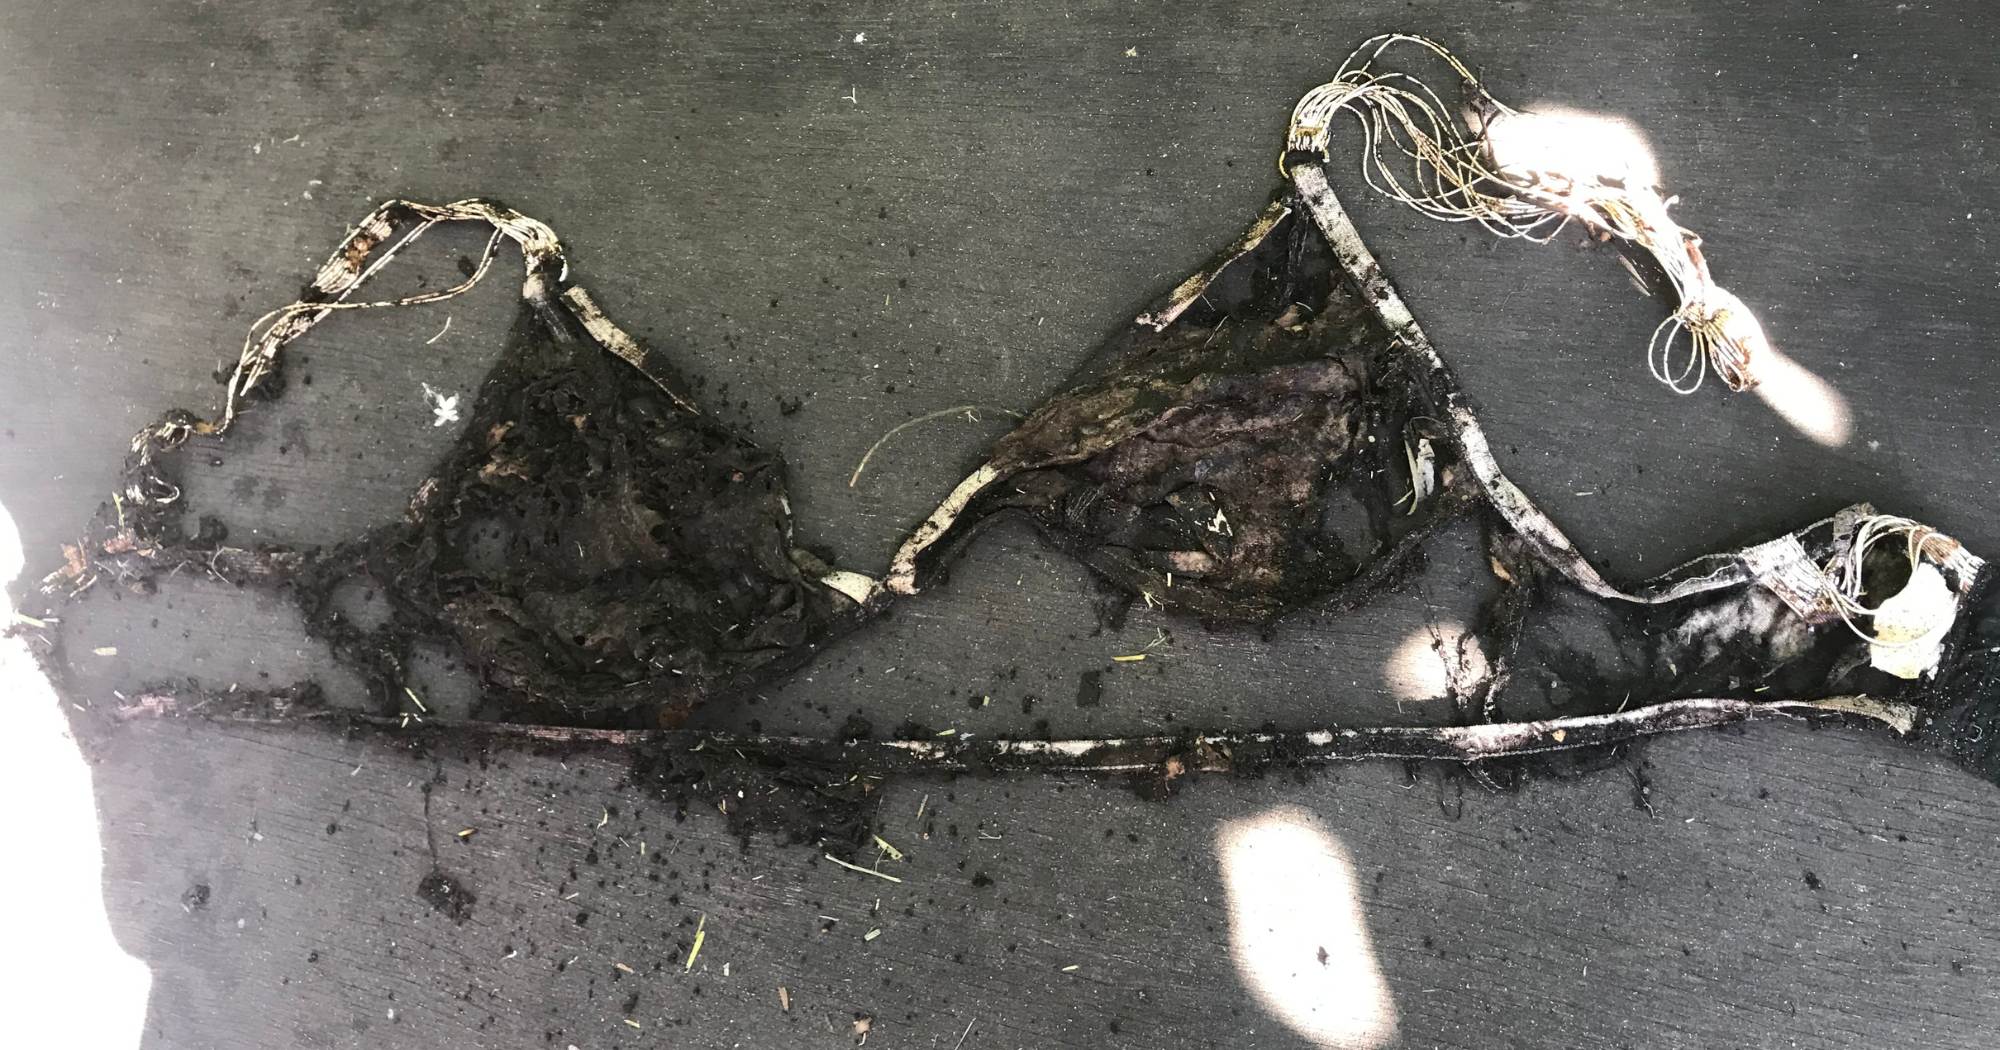 The Very Good Bra is compostable and will breakdown in a worm farm